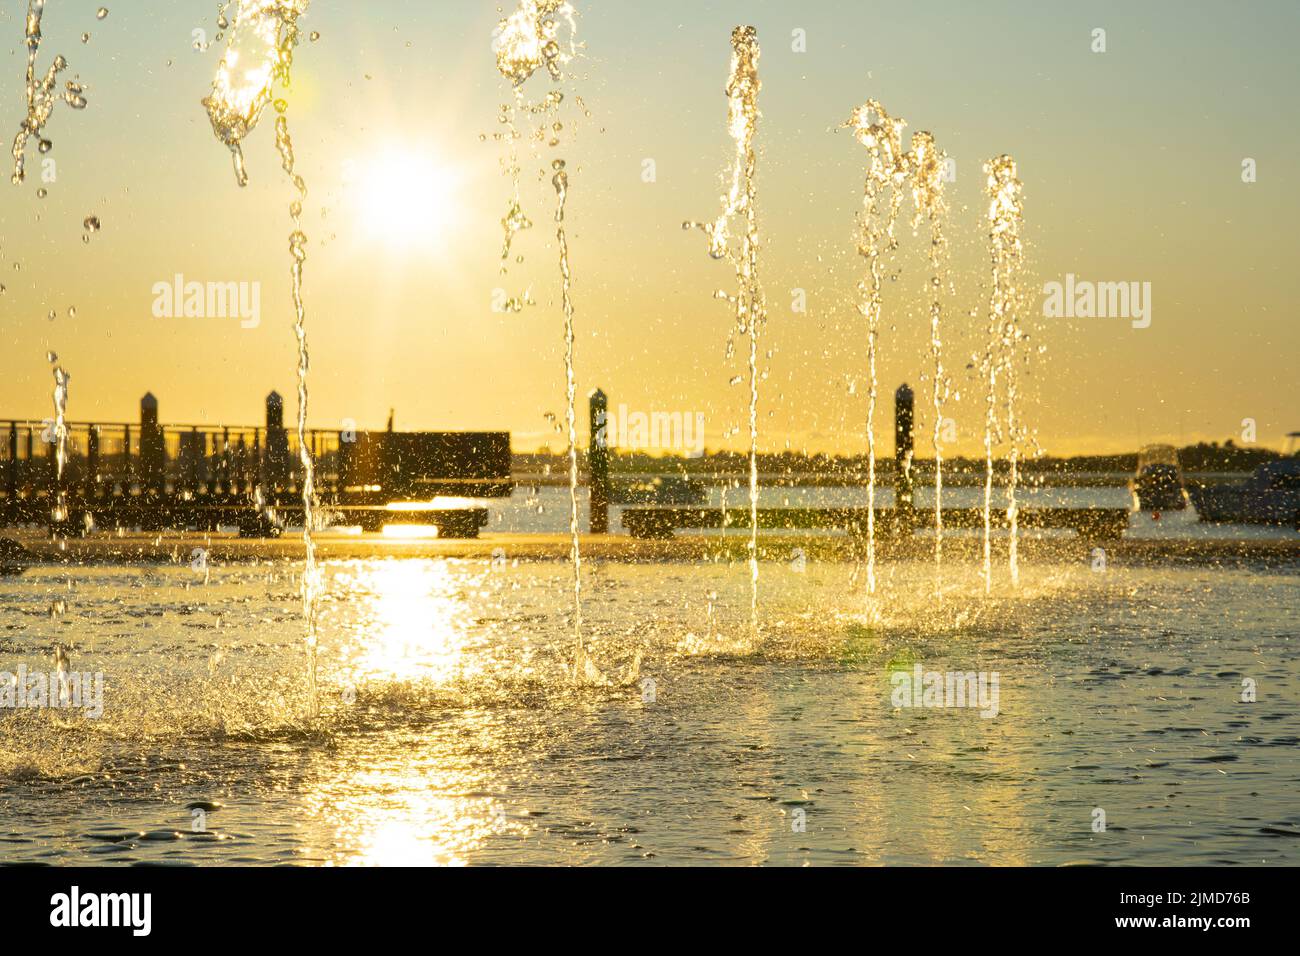 Water feature spraying waters in morning light on Tauranga Strand waterfront Stock Photo